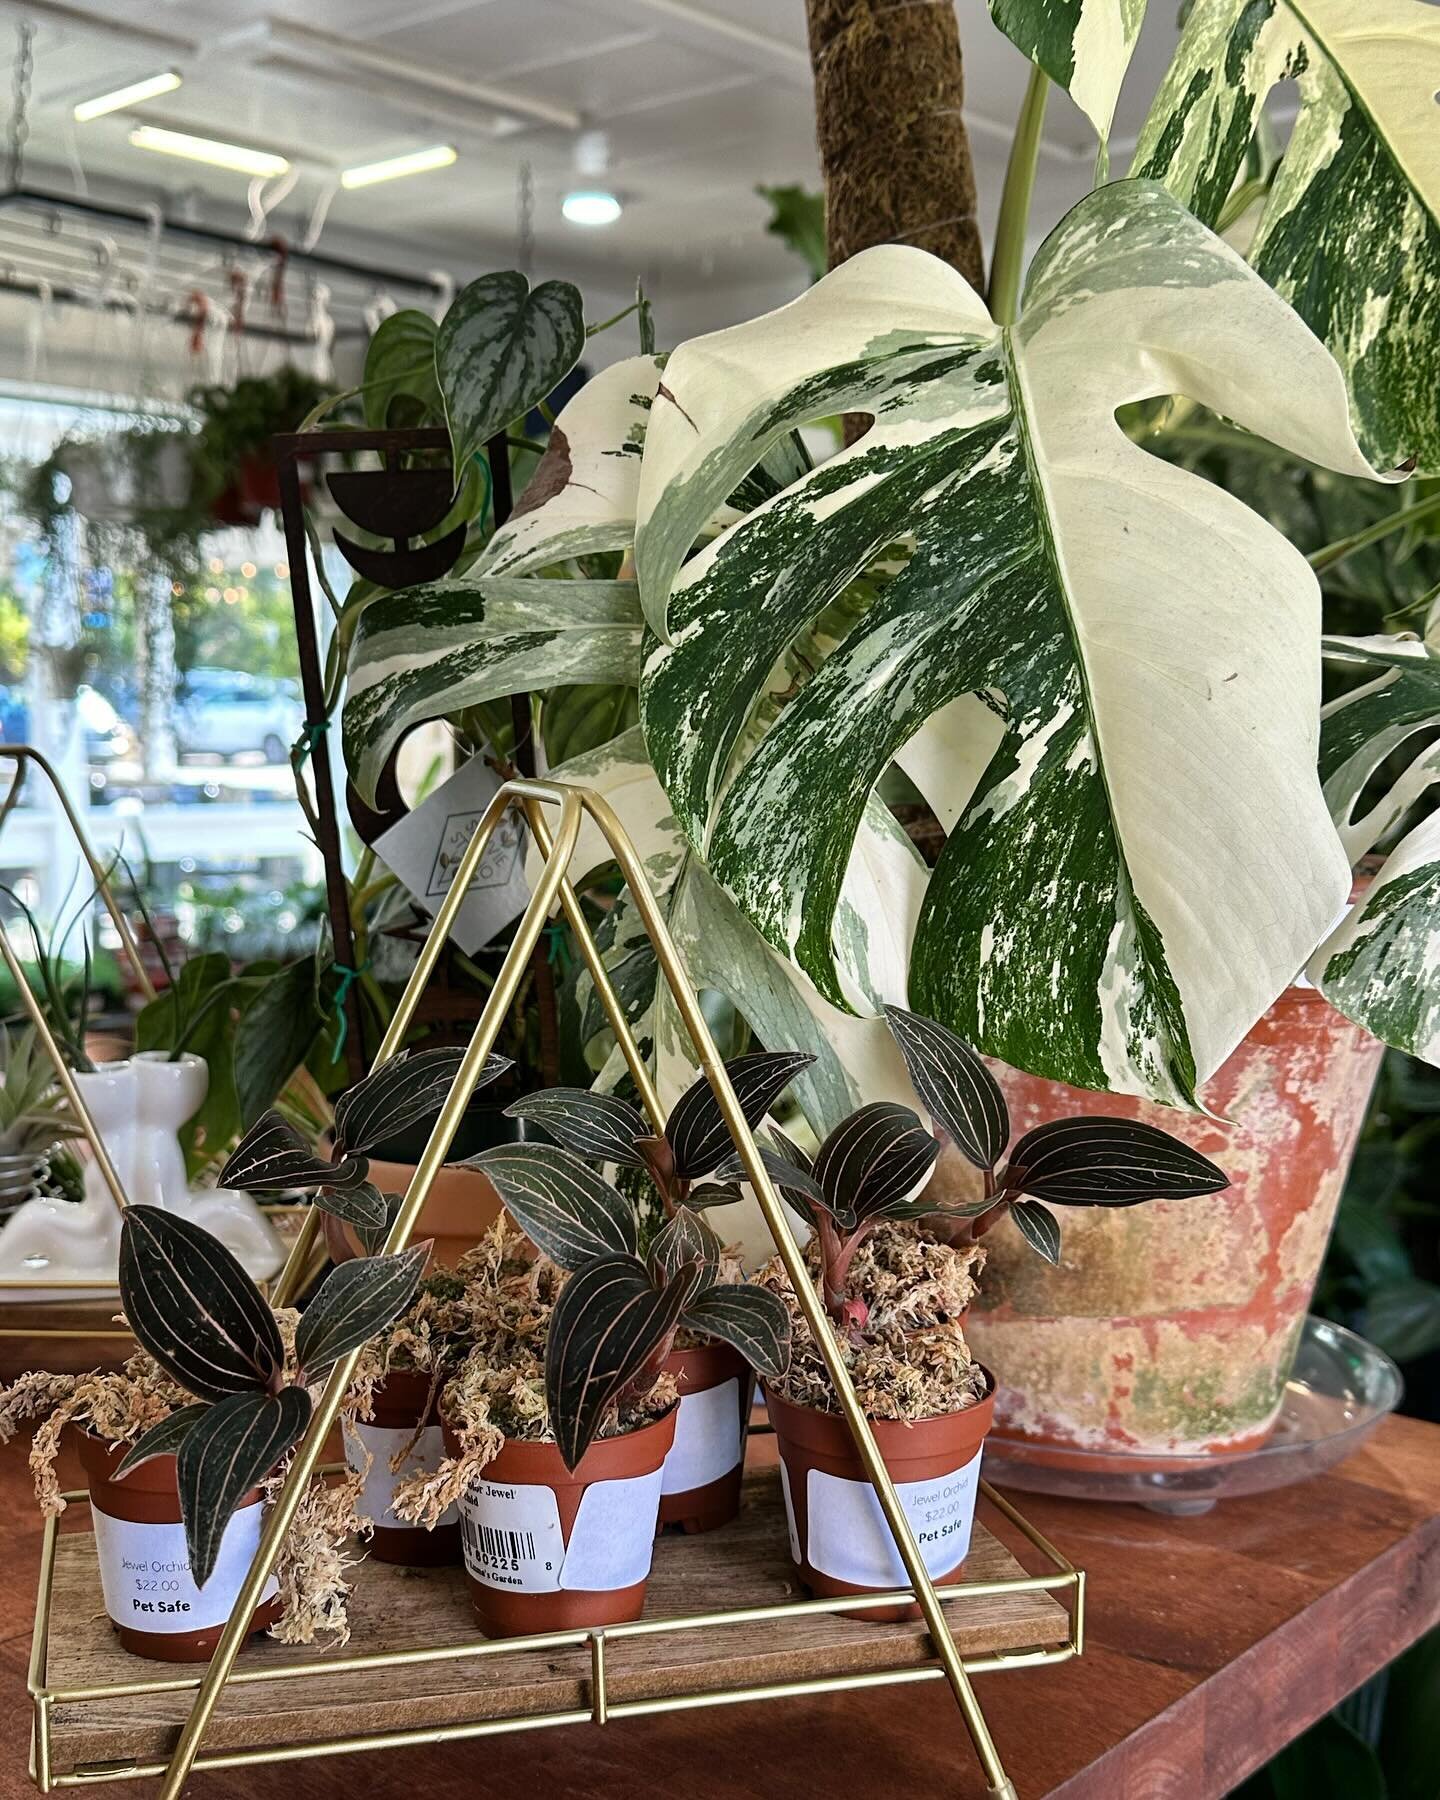 I&rsquo;m just a girl, standing in a plant shop, willing all the plants to come home with me 🥰🪴💕
&bull;
&bull;
&bull;
#monsteraalboborsigianavariegata #plantsmakepeoplehappy #plantsofinstagram #plantsbythevillage #curlyruplants